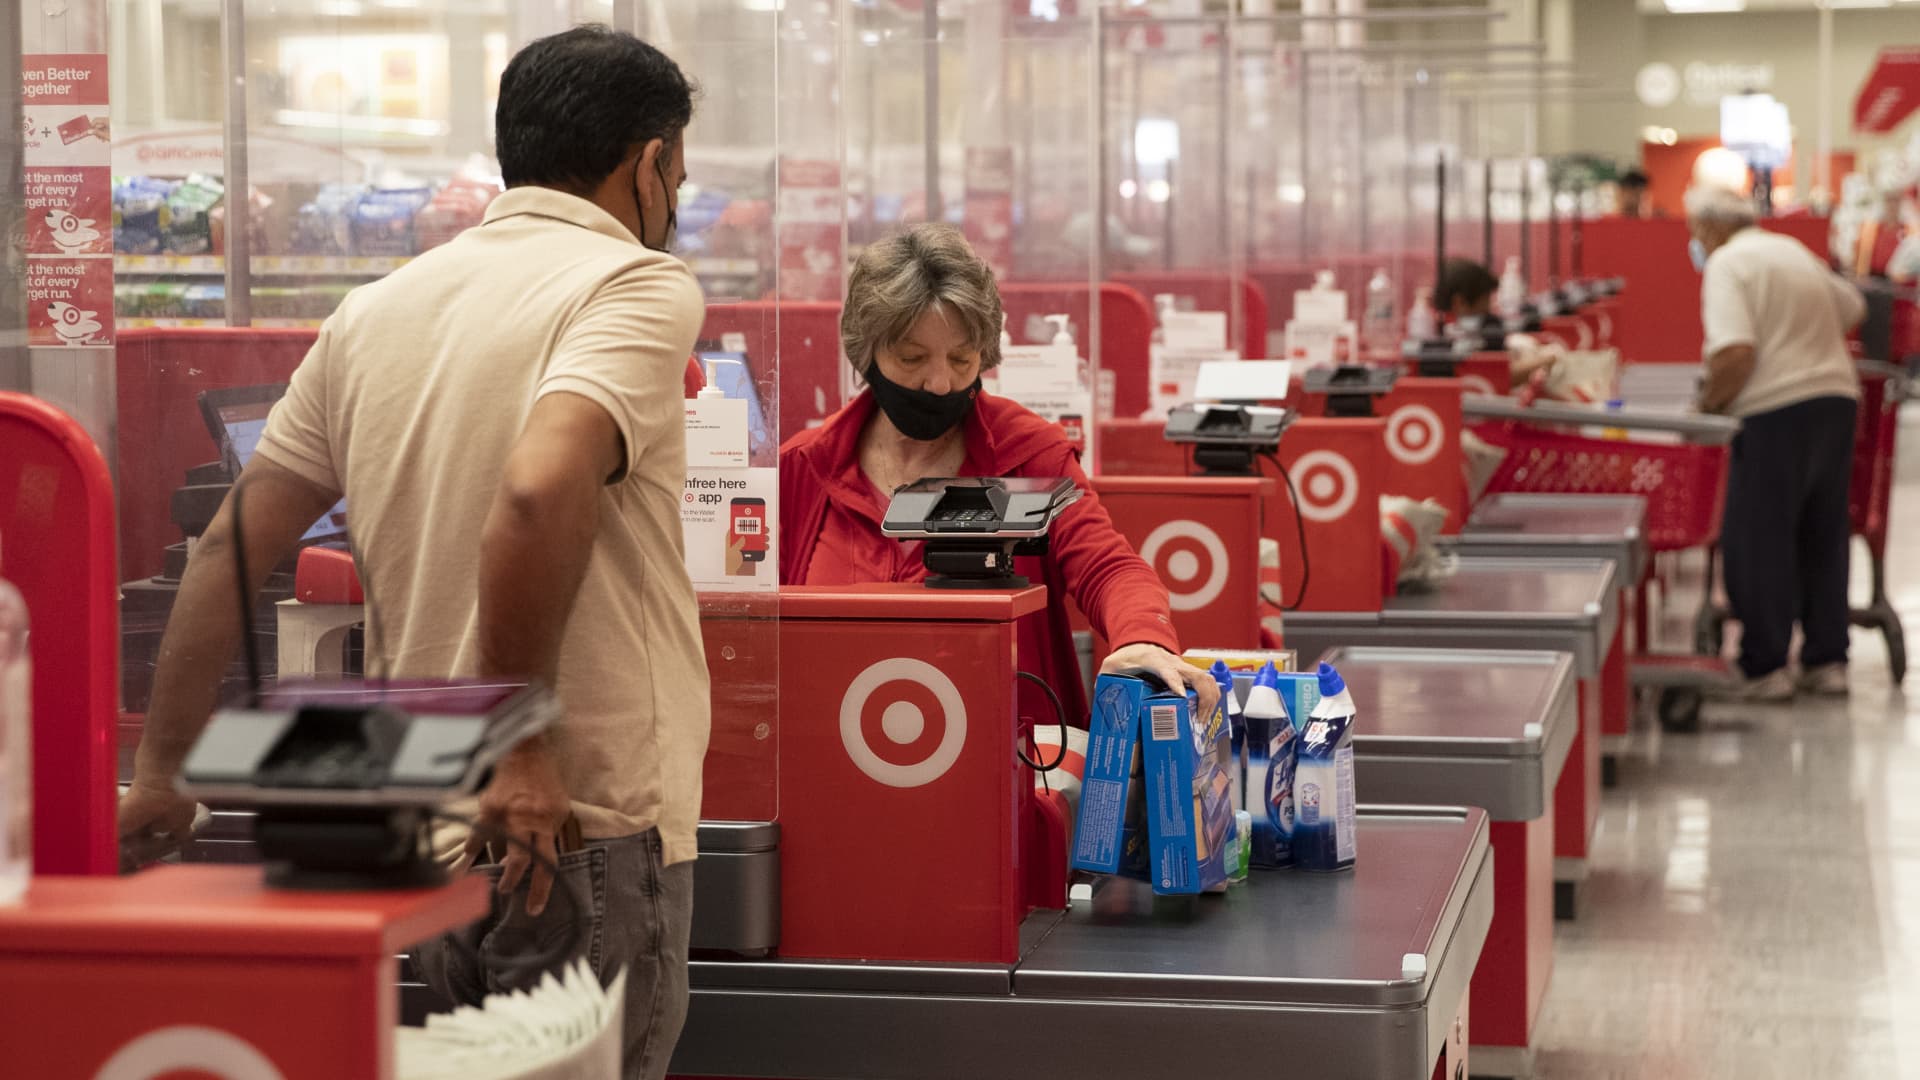 Employees assist customers at the checkout area of a supermarket on May 11, 2022 in New York City.